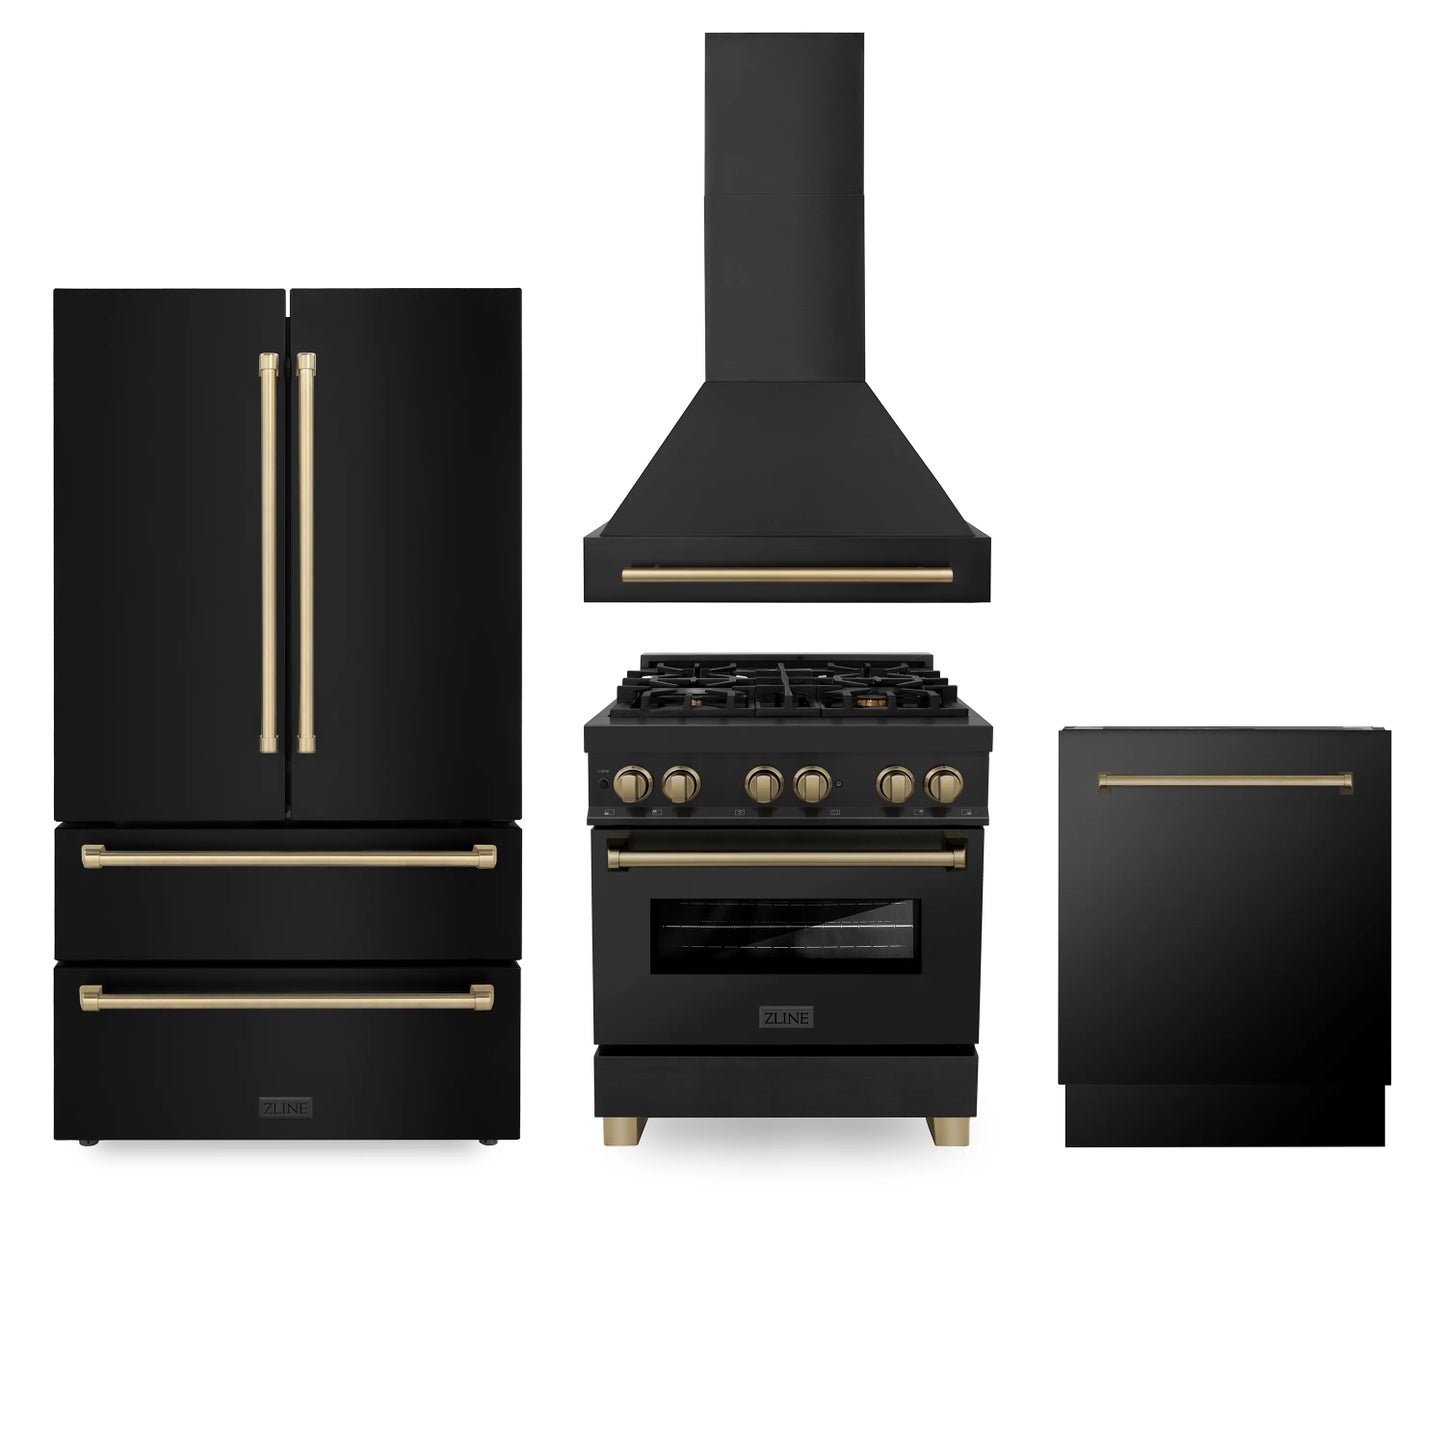 Complete Kitchen Set: ZLINE 30 in. Autograph Edition Dual Fuel Range, Hood, Dishwasher, and Refrigerator with Bronze Accents